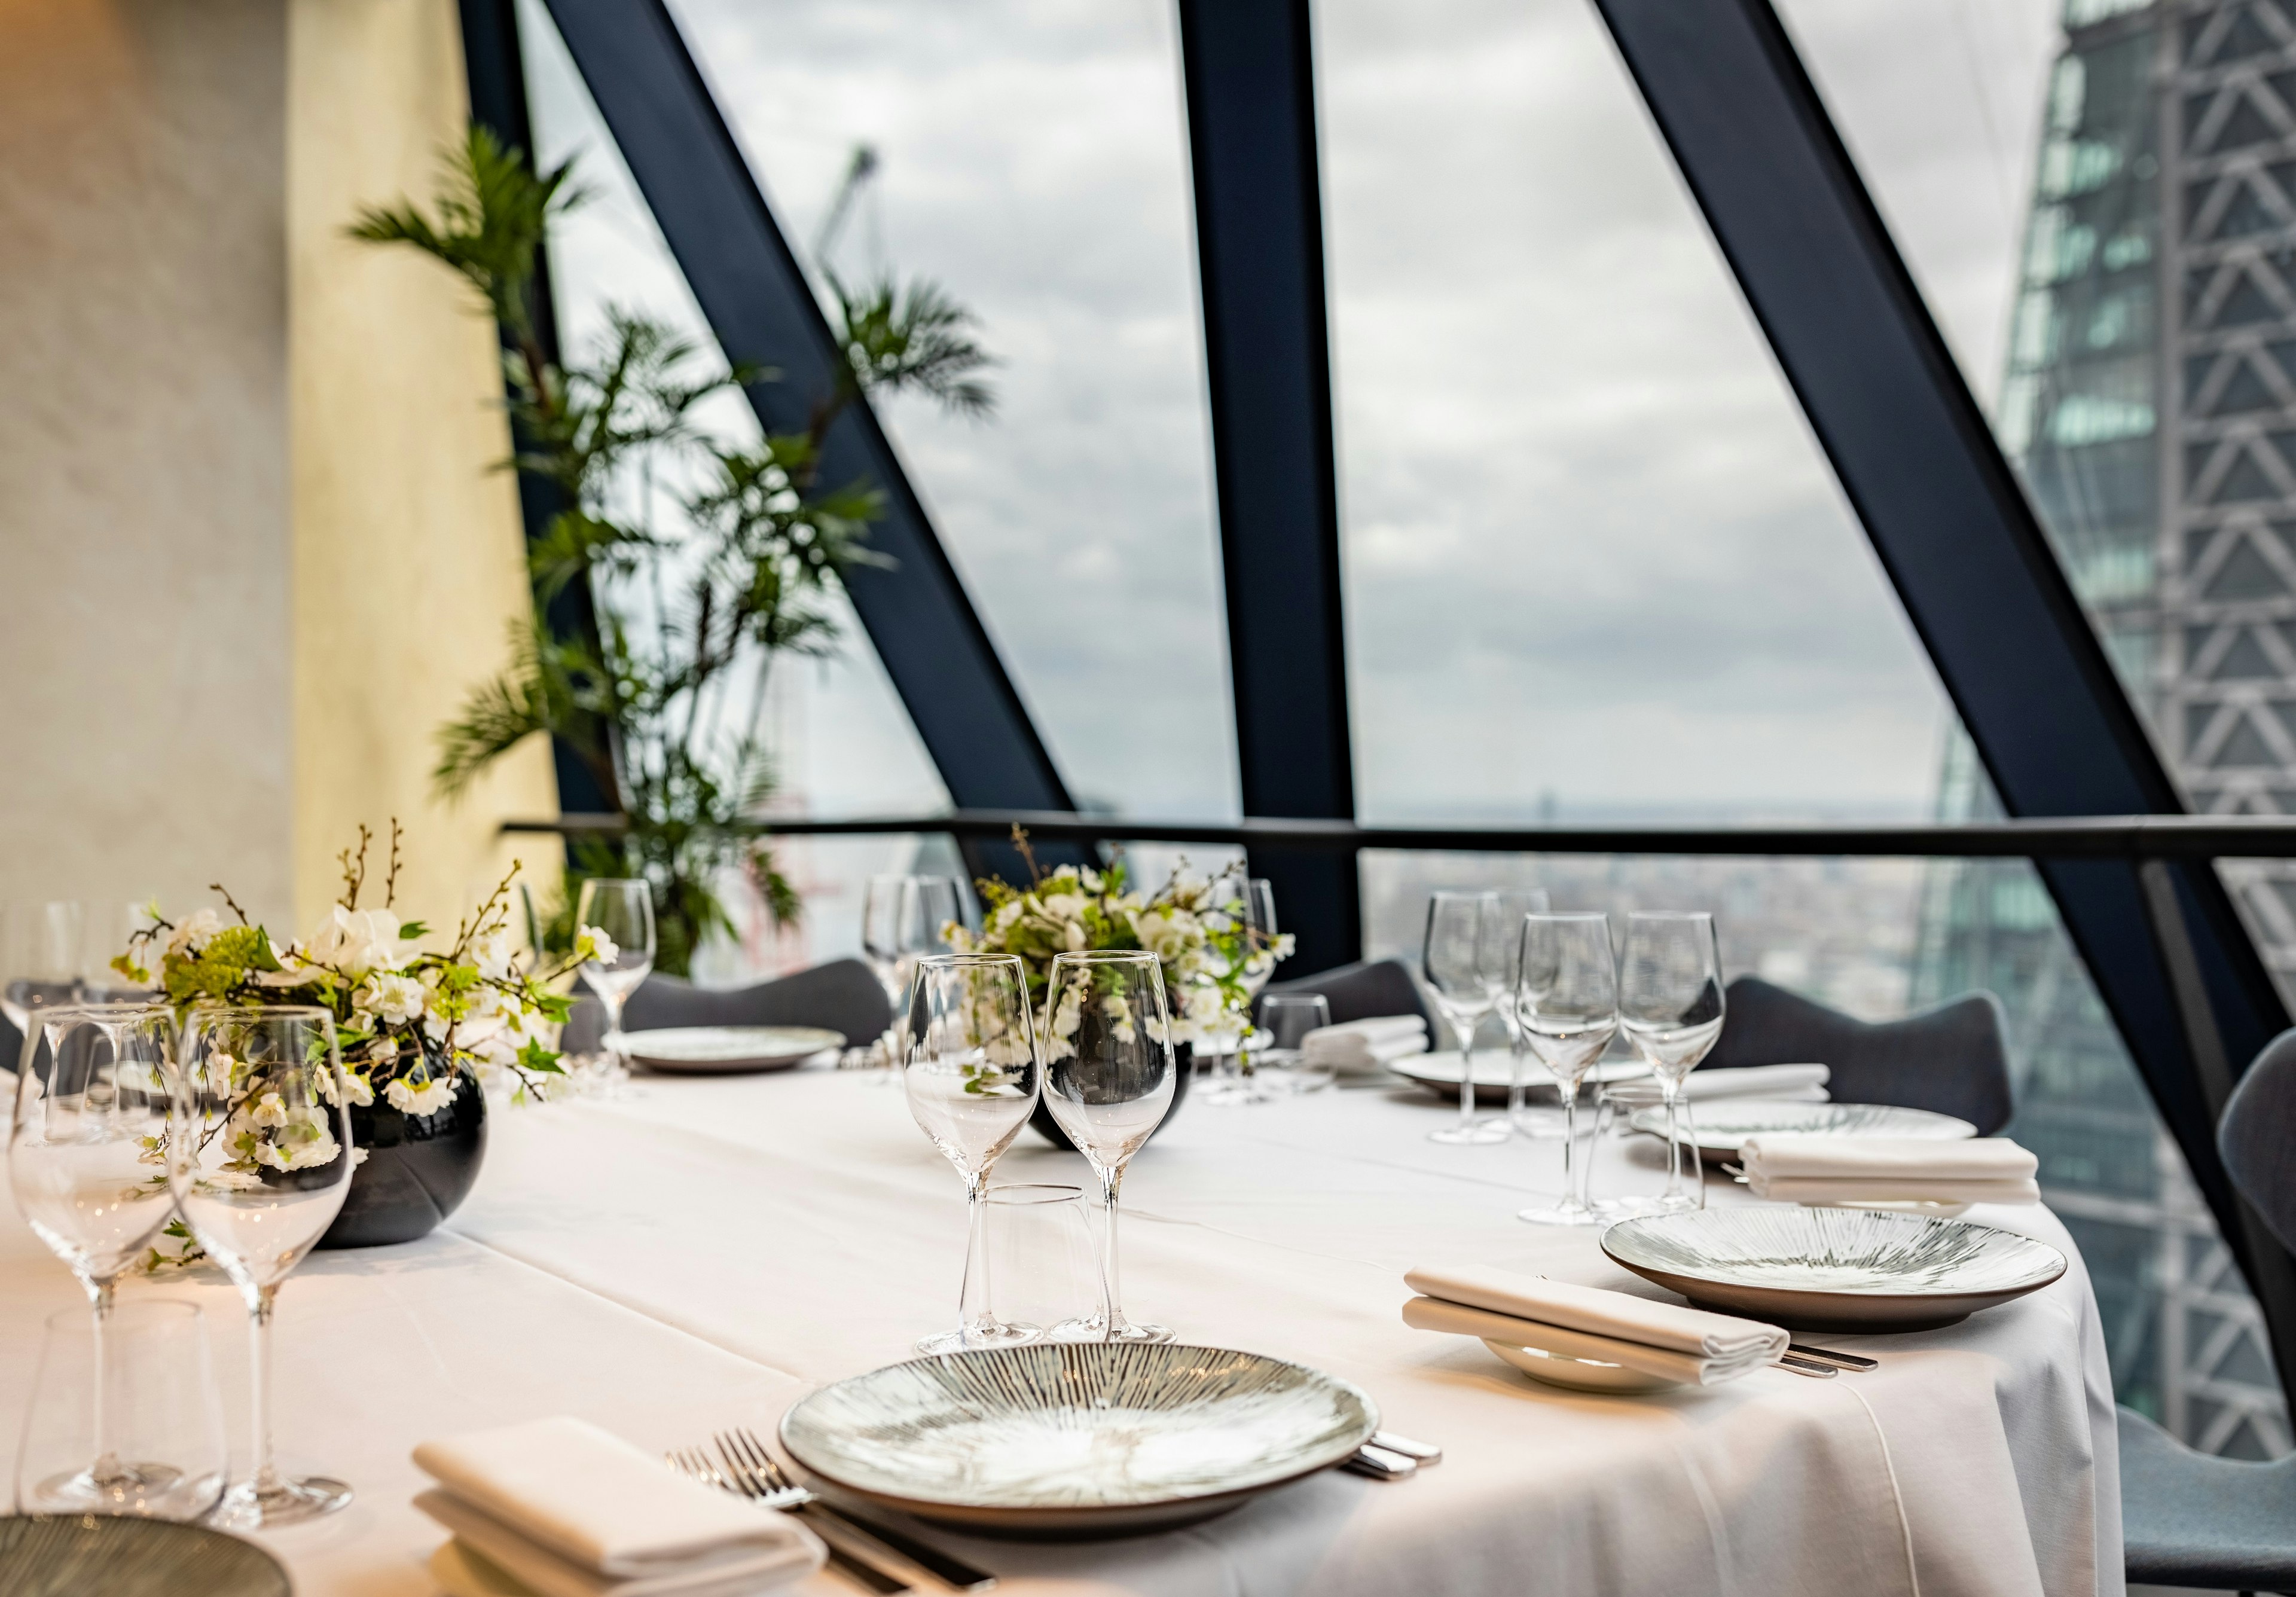 Events - Searcys at the Gherkin